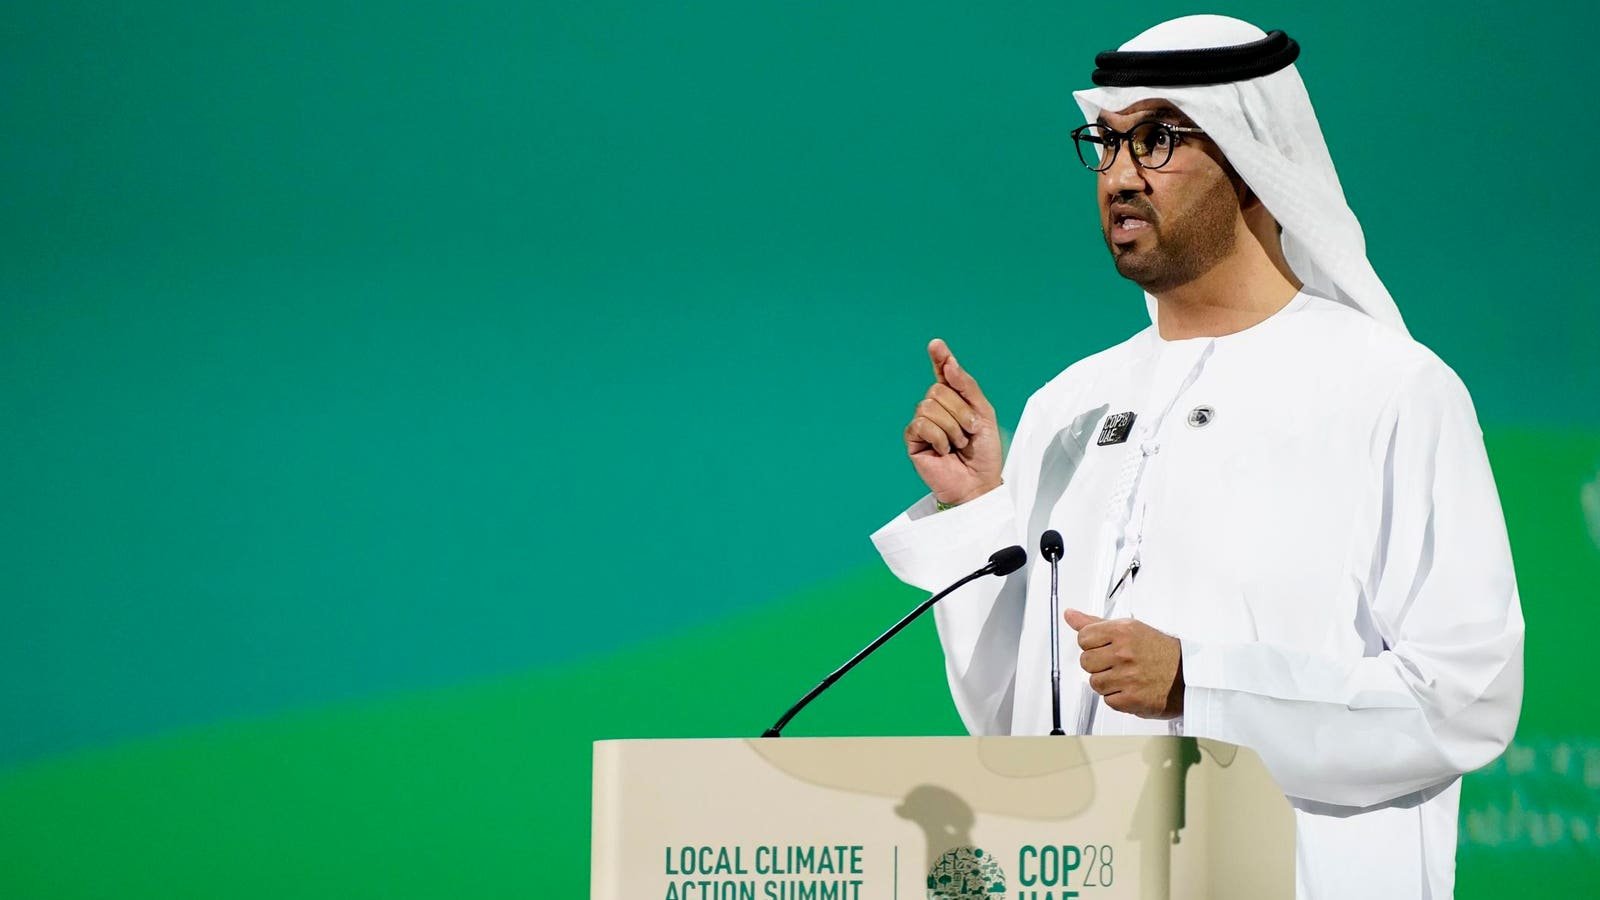 COP28 Advisory Board Member Resigns Over Reports UAE Used Climate Talks To Push Fossil Fuels